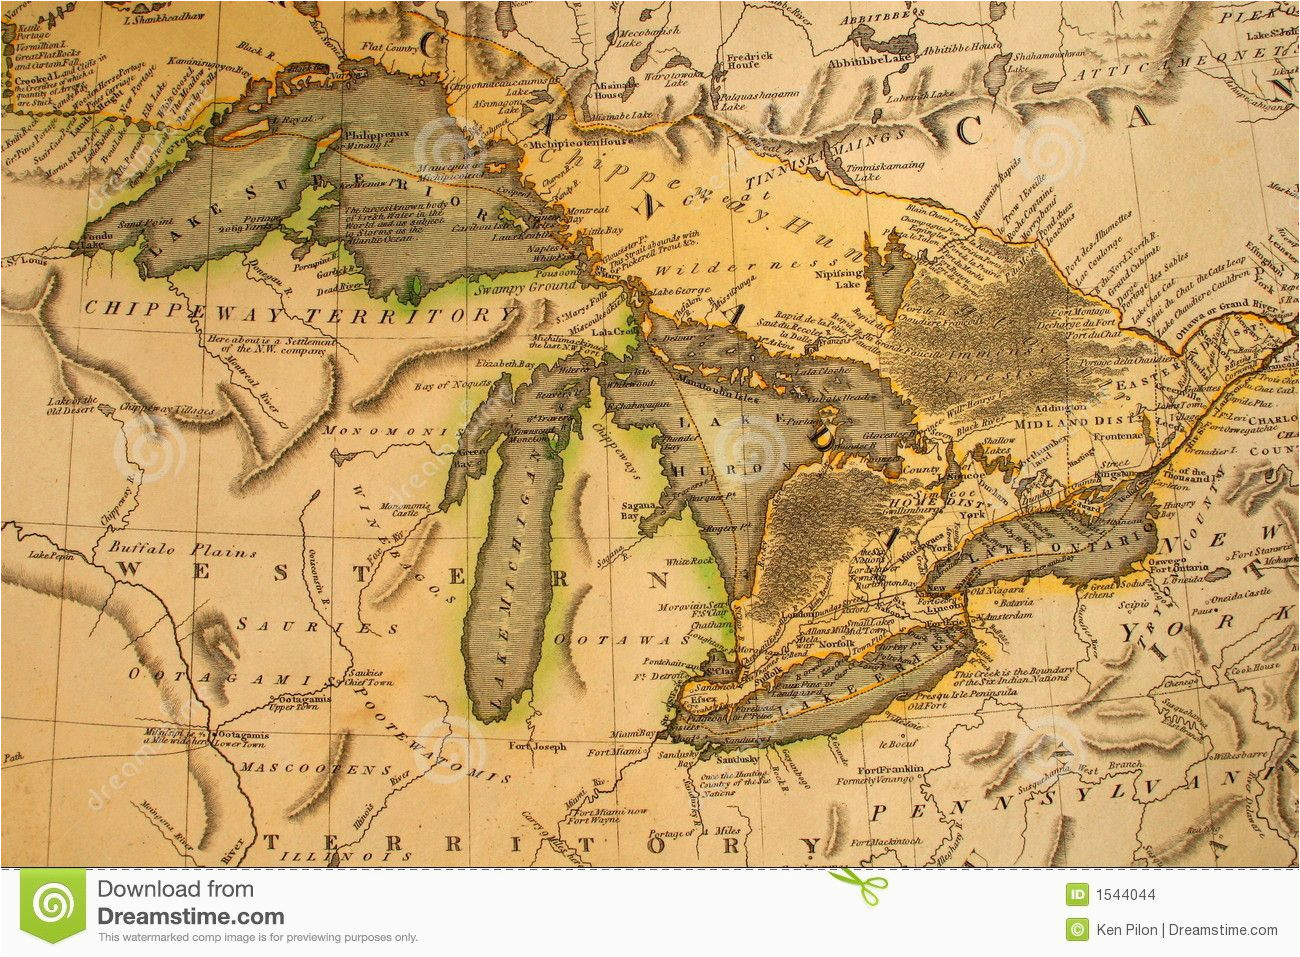 35 awesome vintage michigan maps images art pinterest map